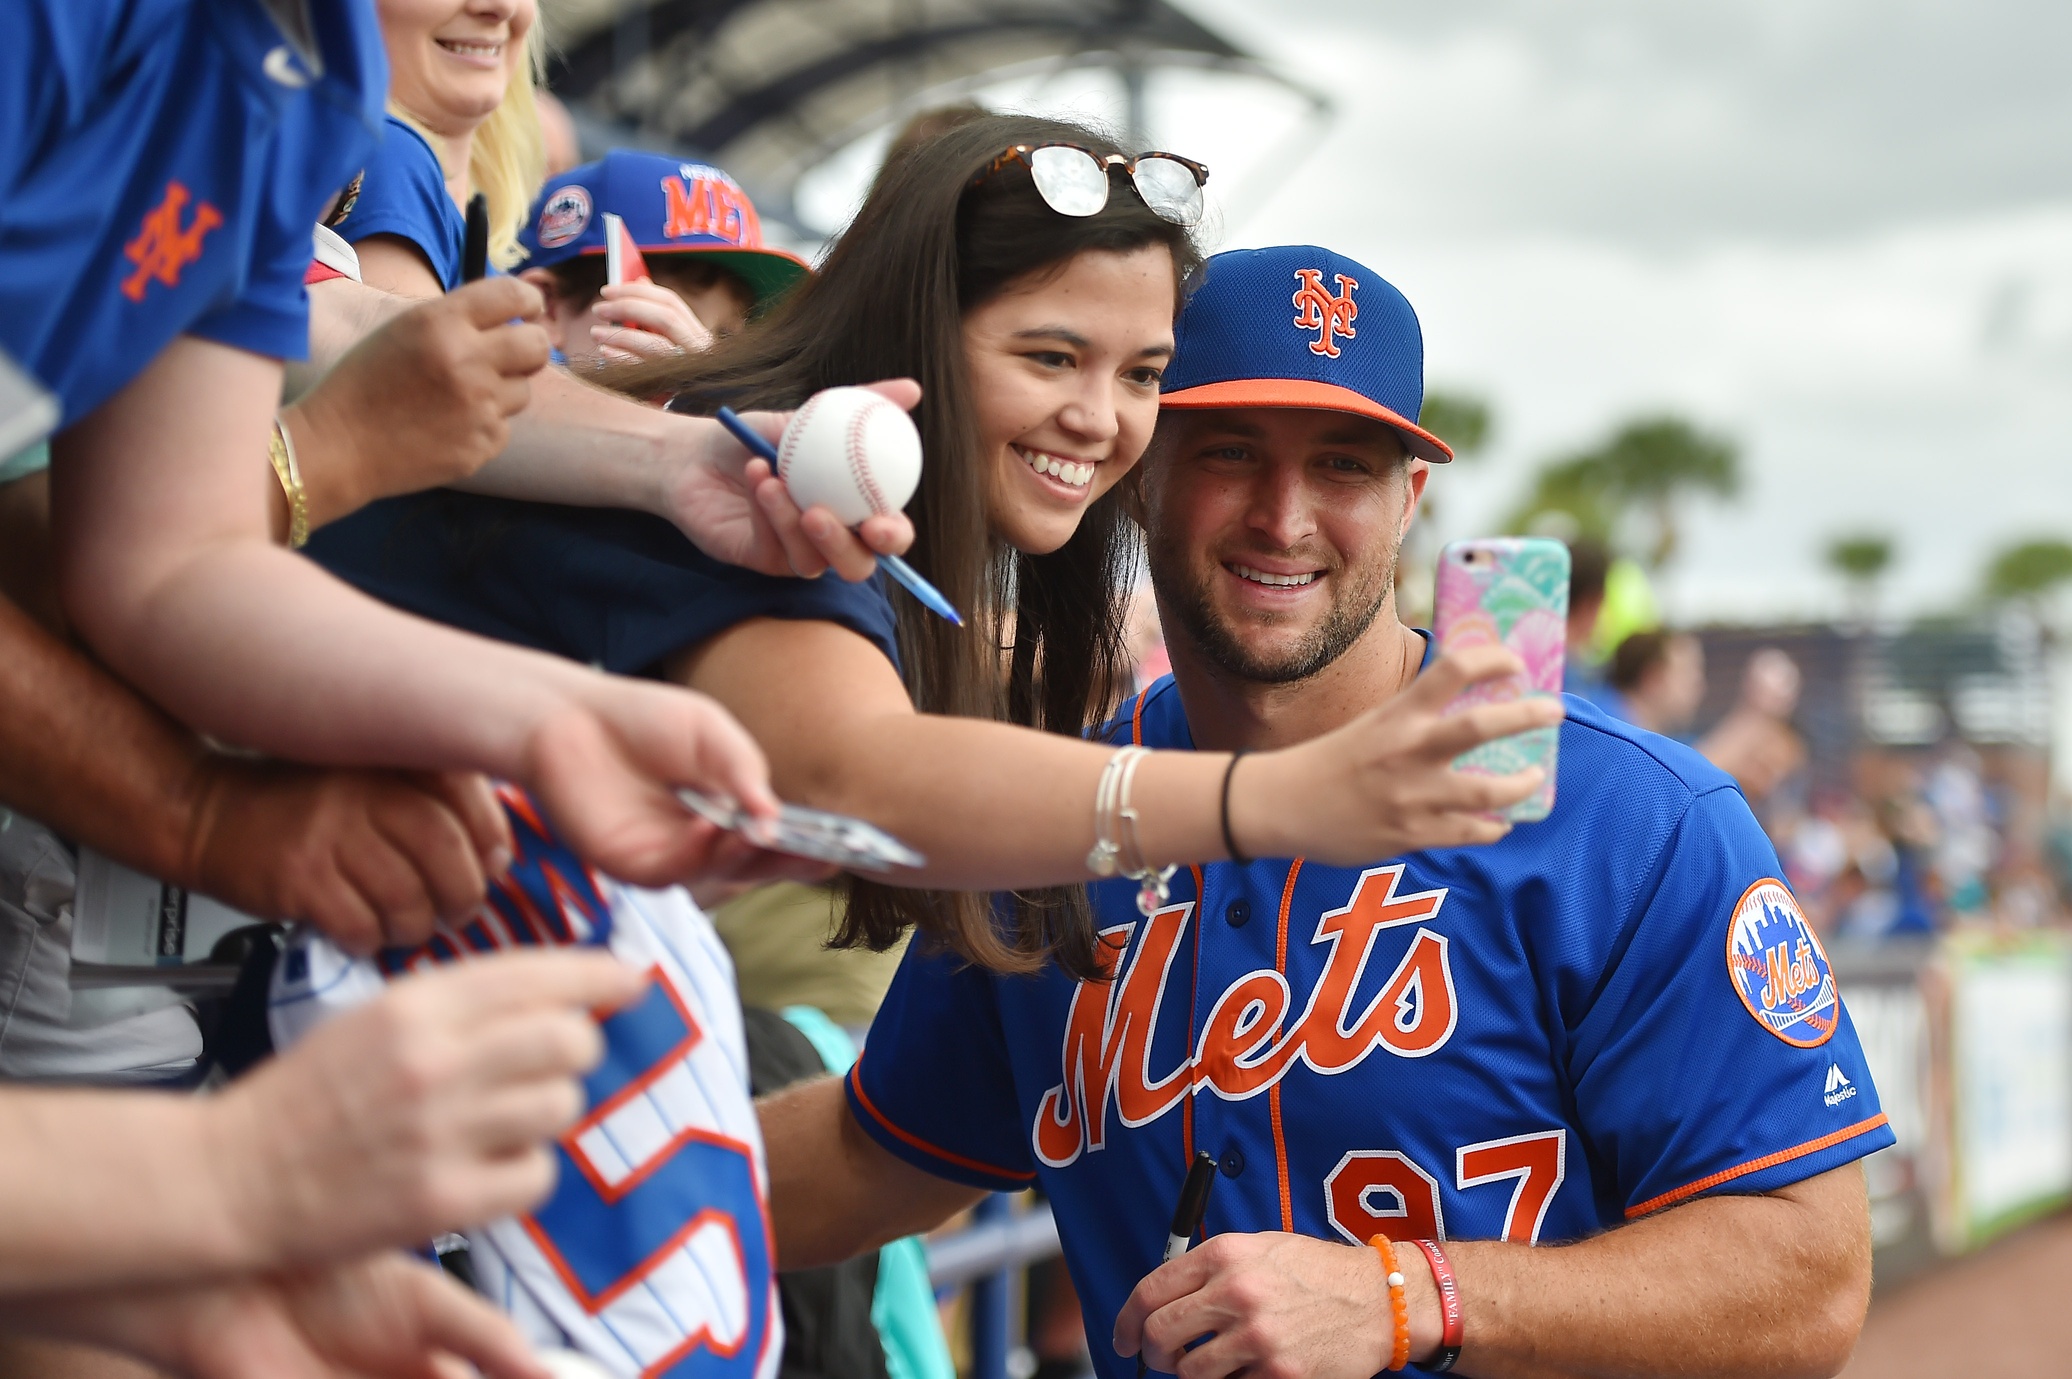 Mar 8, 2017; Port St. Lucie, FL, USA; New York Mets designated hitter Tim Tebow (97) takes a selfie picture with a fan prior to the game against the Boston Red Sox at First Data Field. Mandatory Credit: Jasen Vinlove-USA TODAY Sports